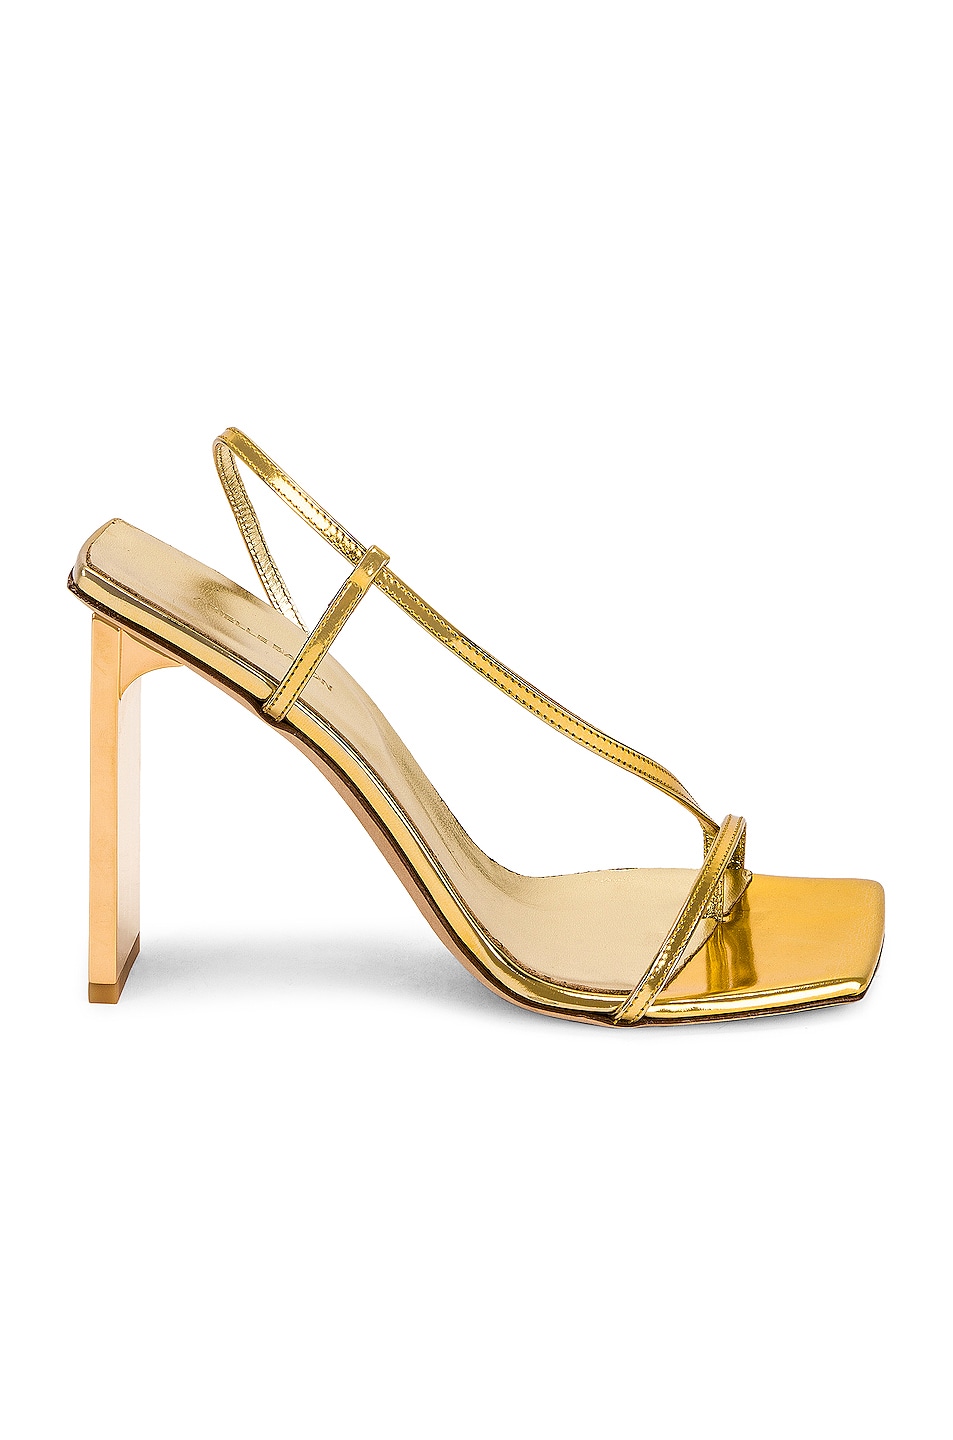 Image 1 of Arielle Baron Narcissus 95 Heel in Gold Metallic